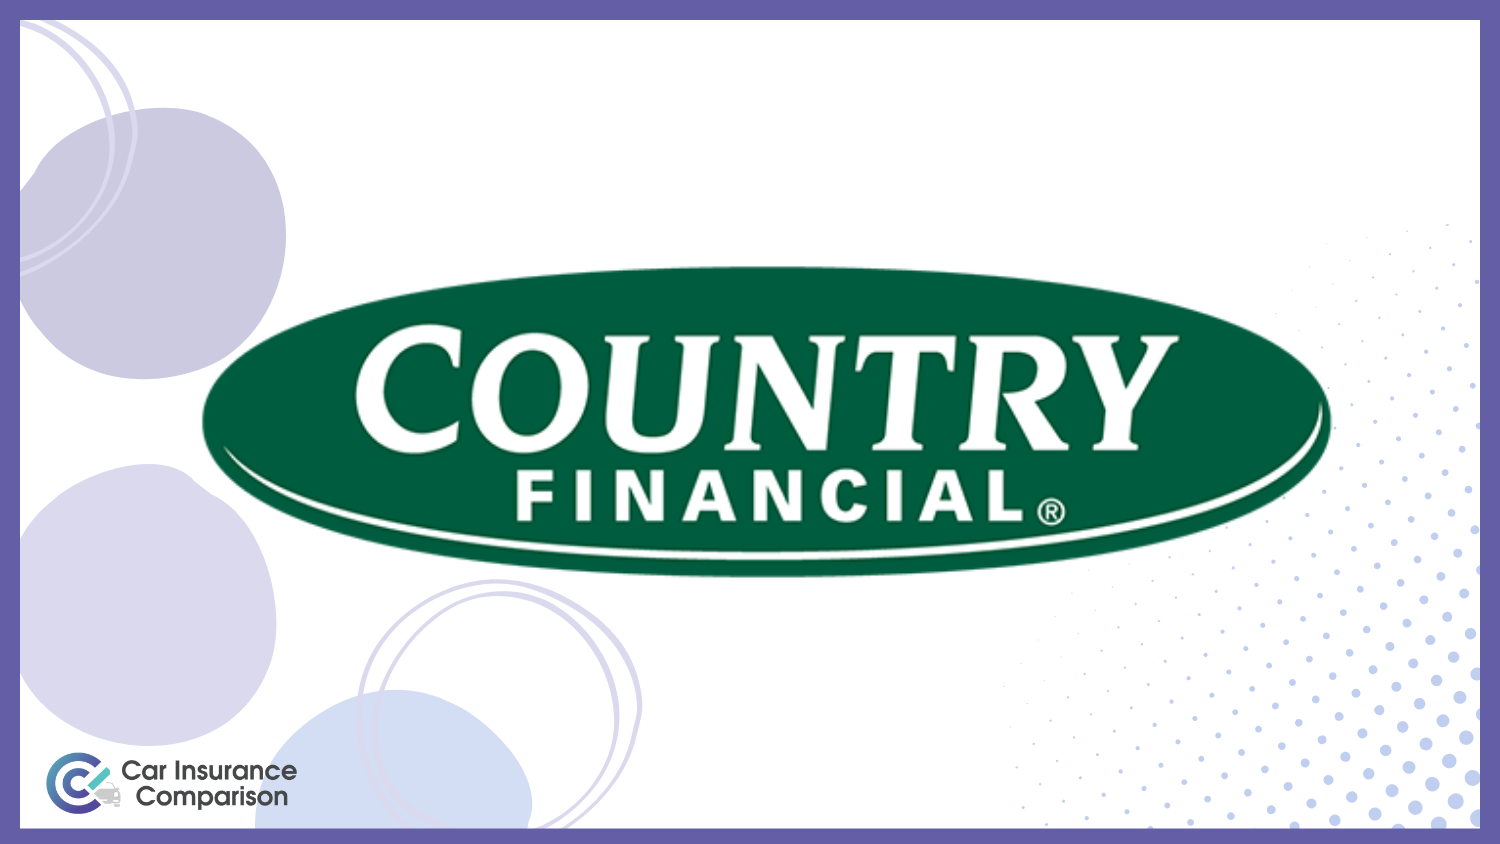 Country Financial: Cheap Car Insurance for Older Vehicles